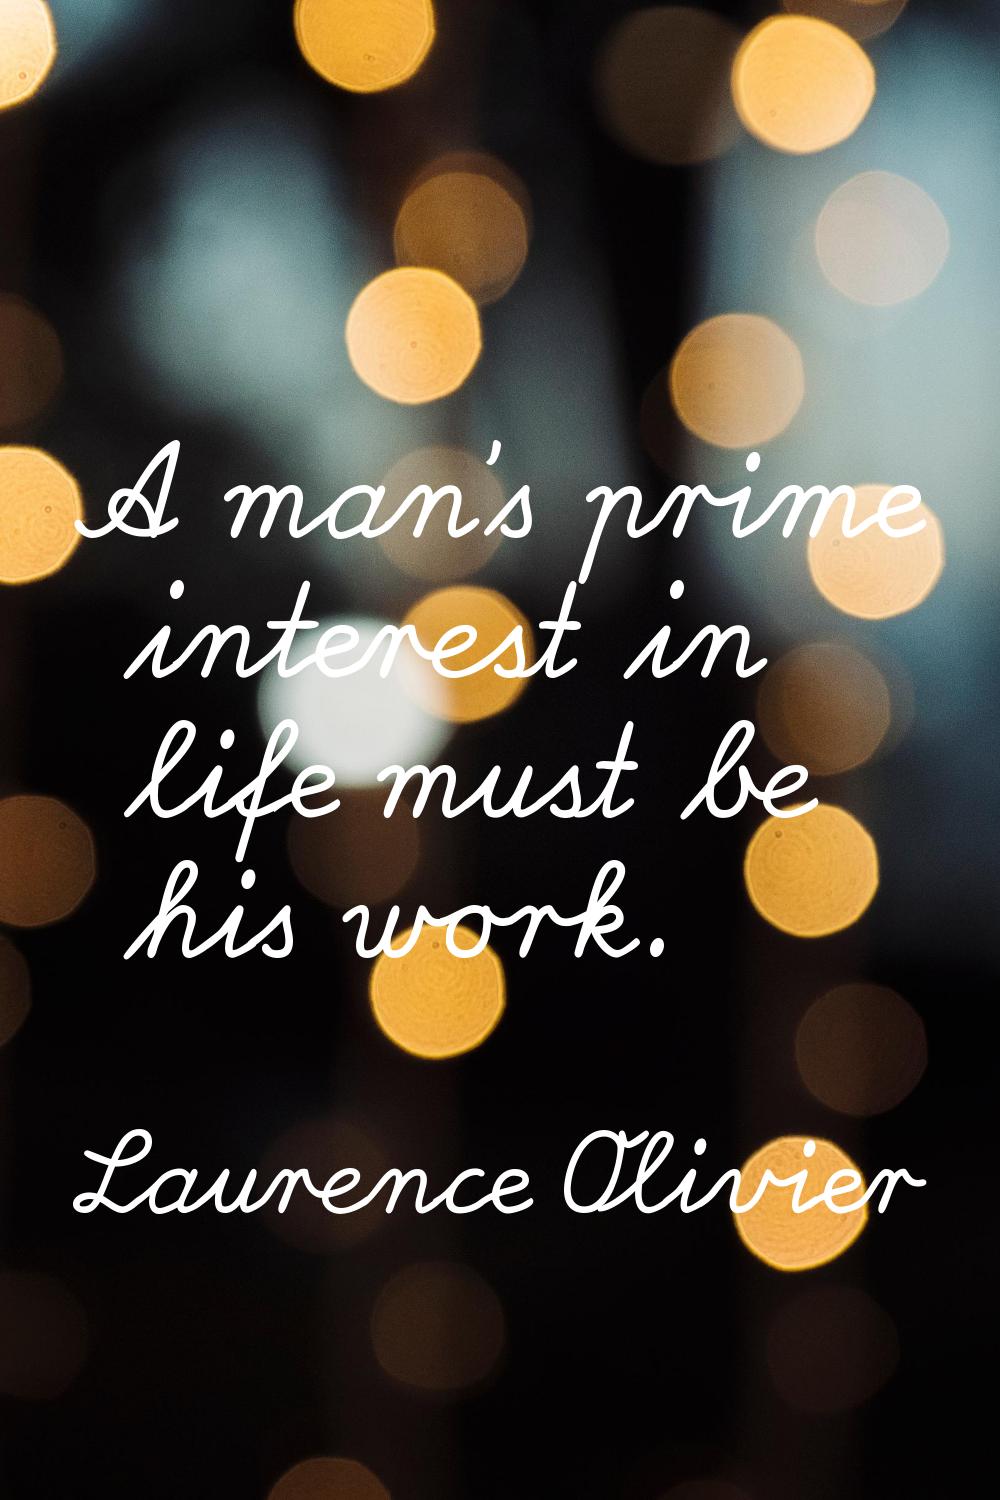 A man's prime interest in life must be his work.